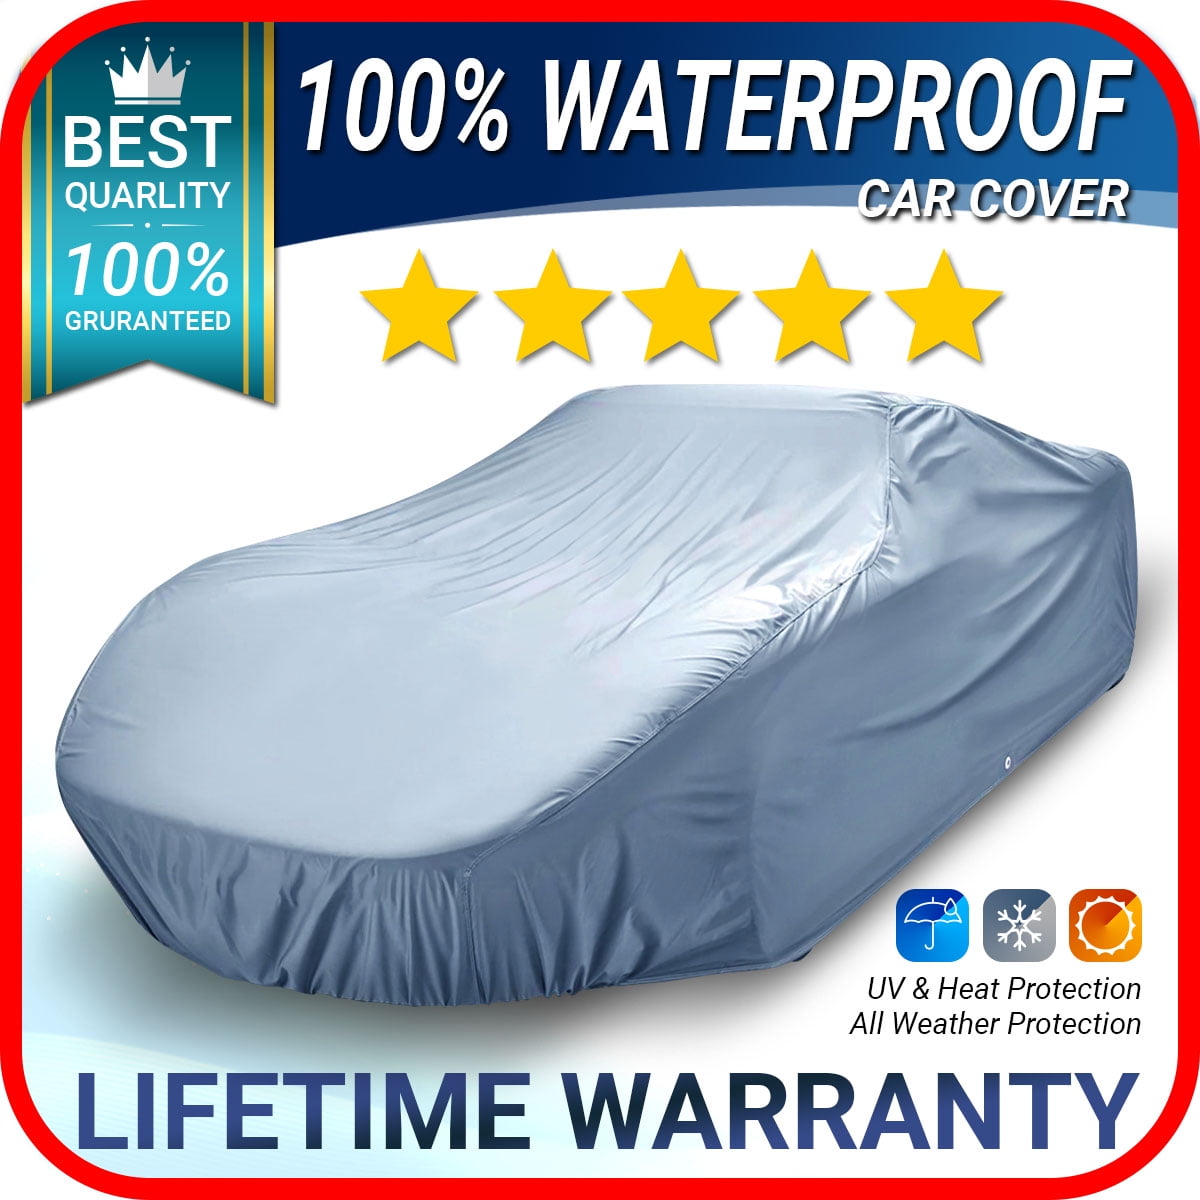 CHRYSLER CROSSFIRE 2003-2008 Full Car Cover Waterproof Summer Winter Cotton Lined Heavy Duty Indoor Outdoor Luxury Rhinos-Autostyling FITS 